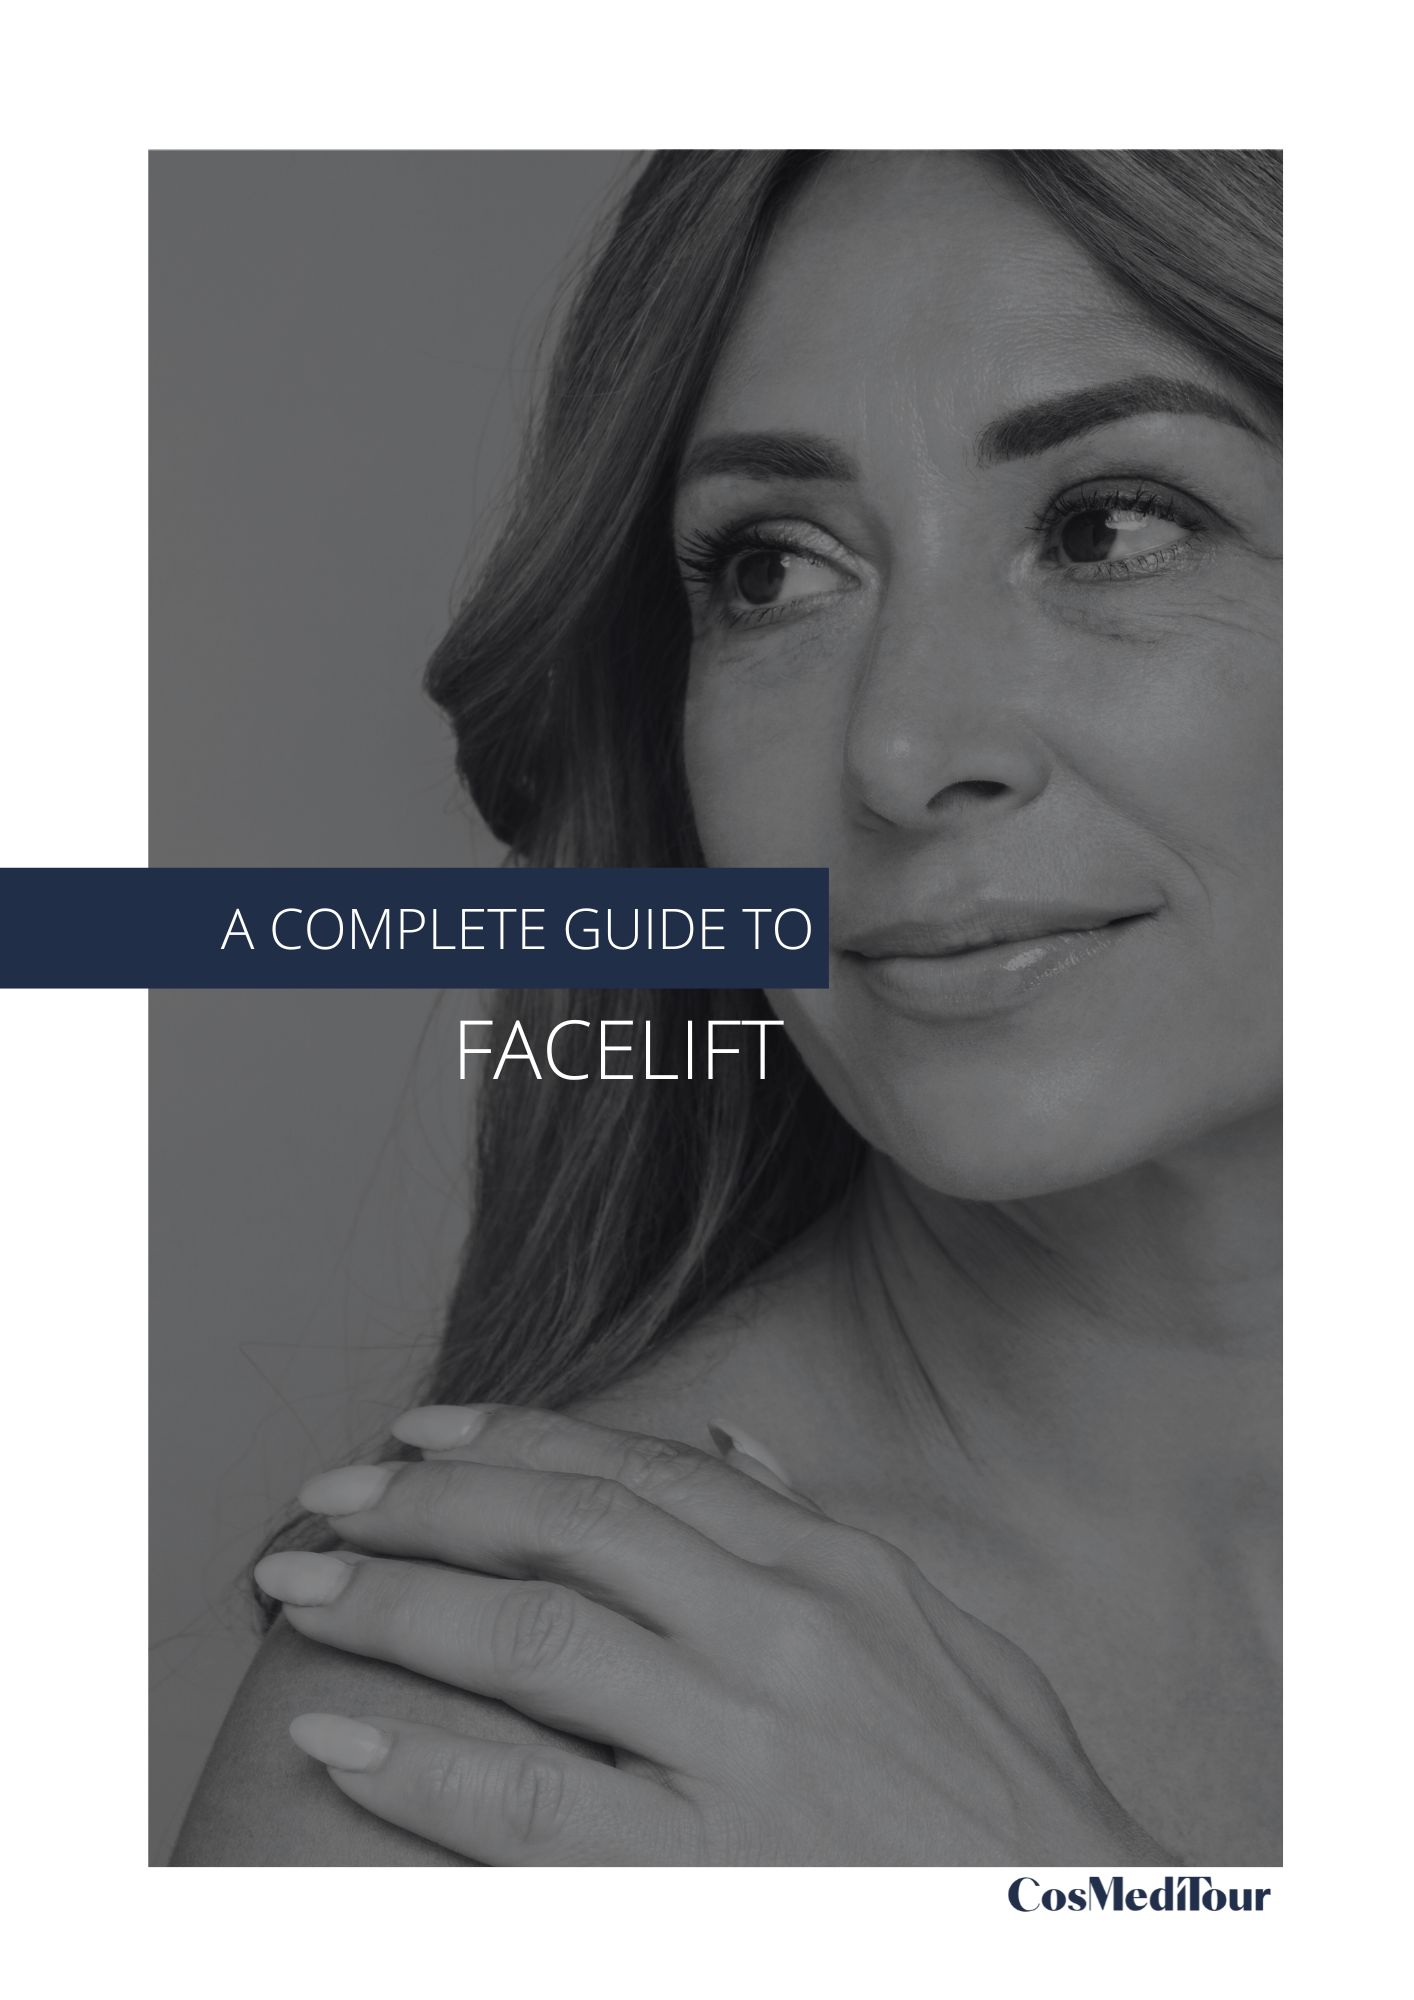 Your Guide to Facelifts